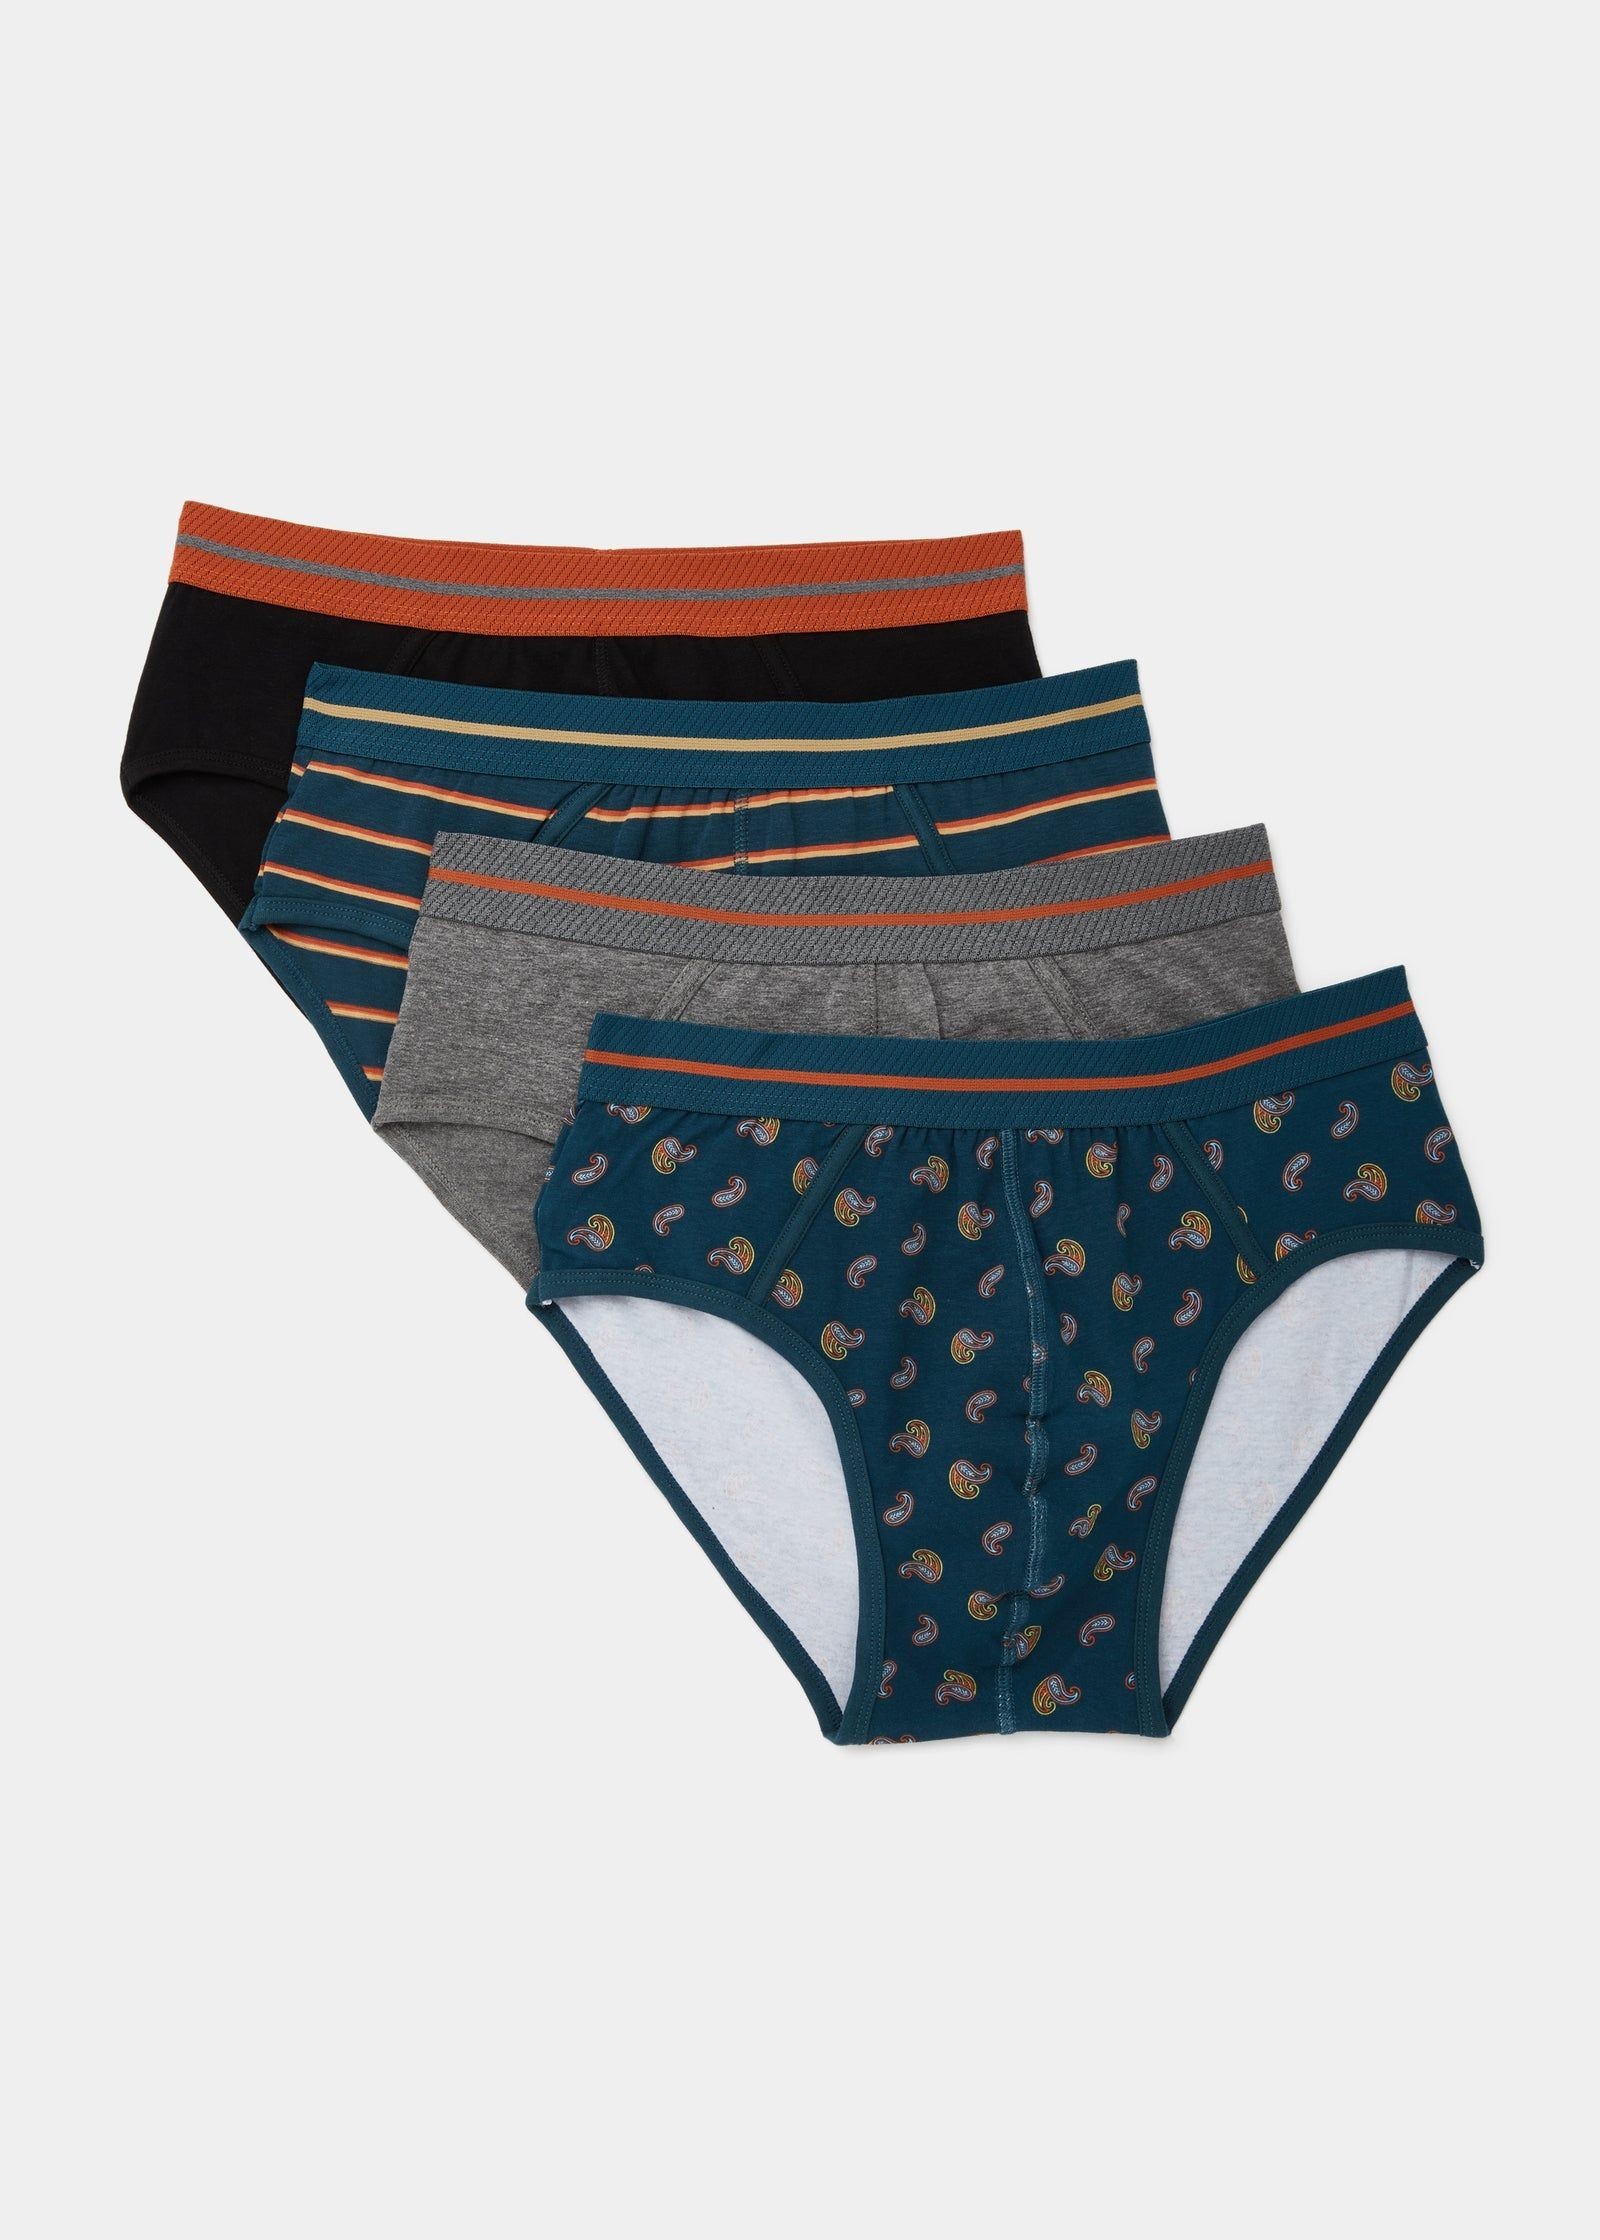 Buy Mens Briefs at Lowest Price from Matalan Bahrain